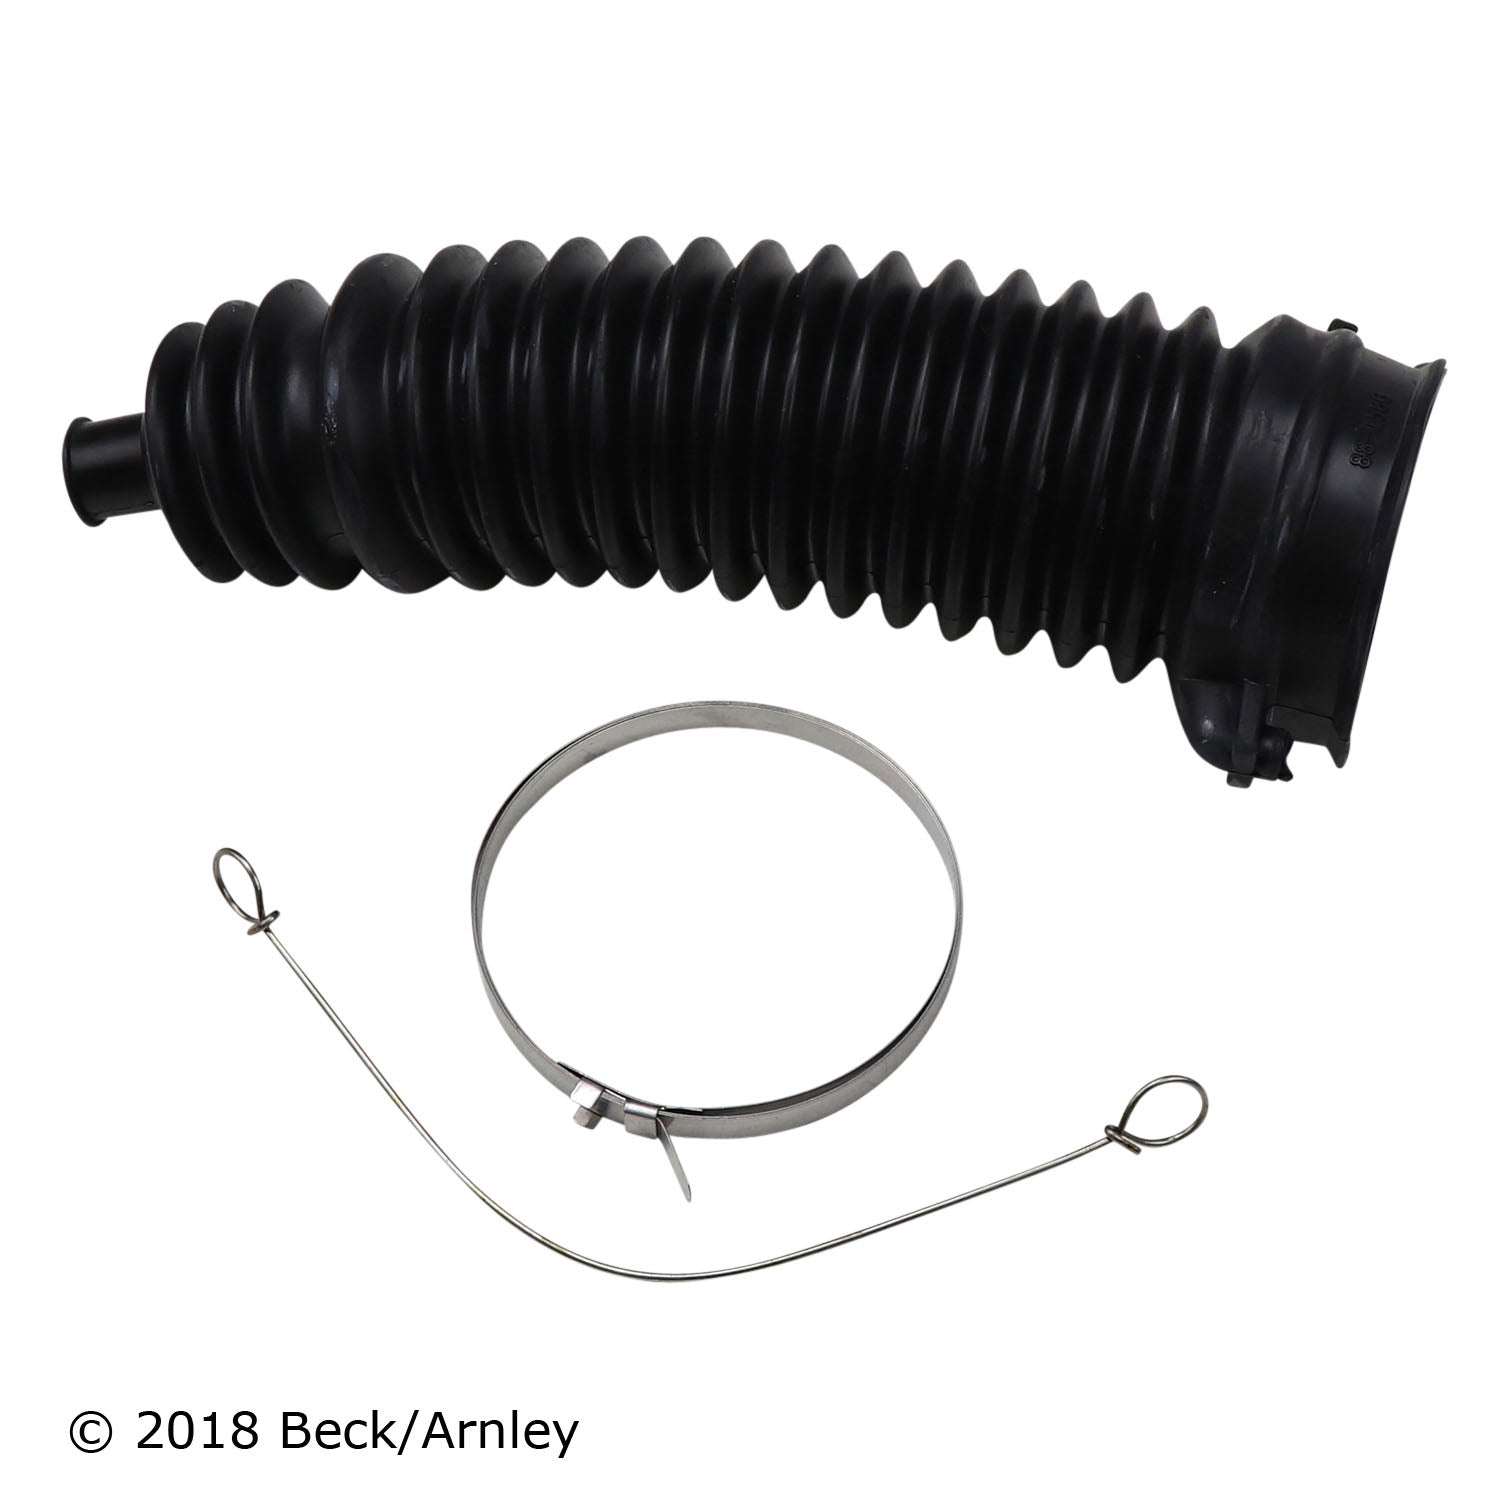 Beck Arnley 103-2902 Front Rack and Pinion Bellows Kit for Ford Ranger Mazda B2300 B2500 B3000 B4000